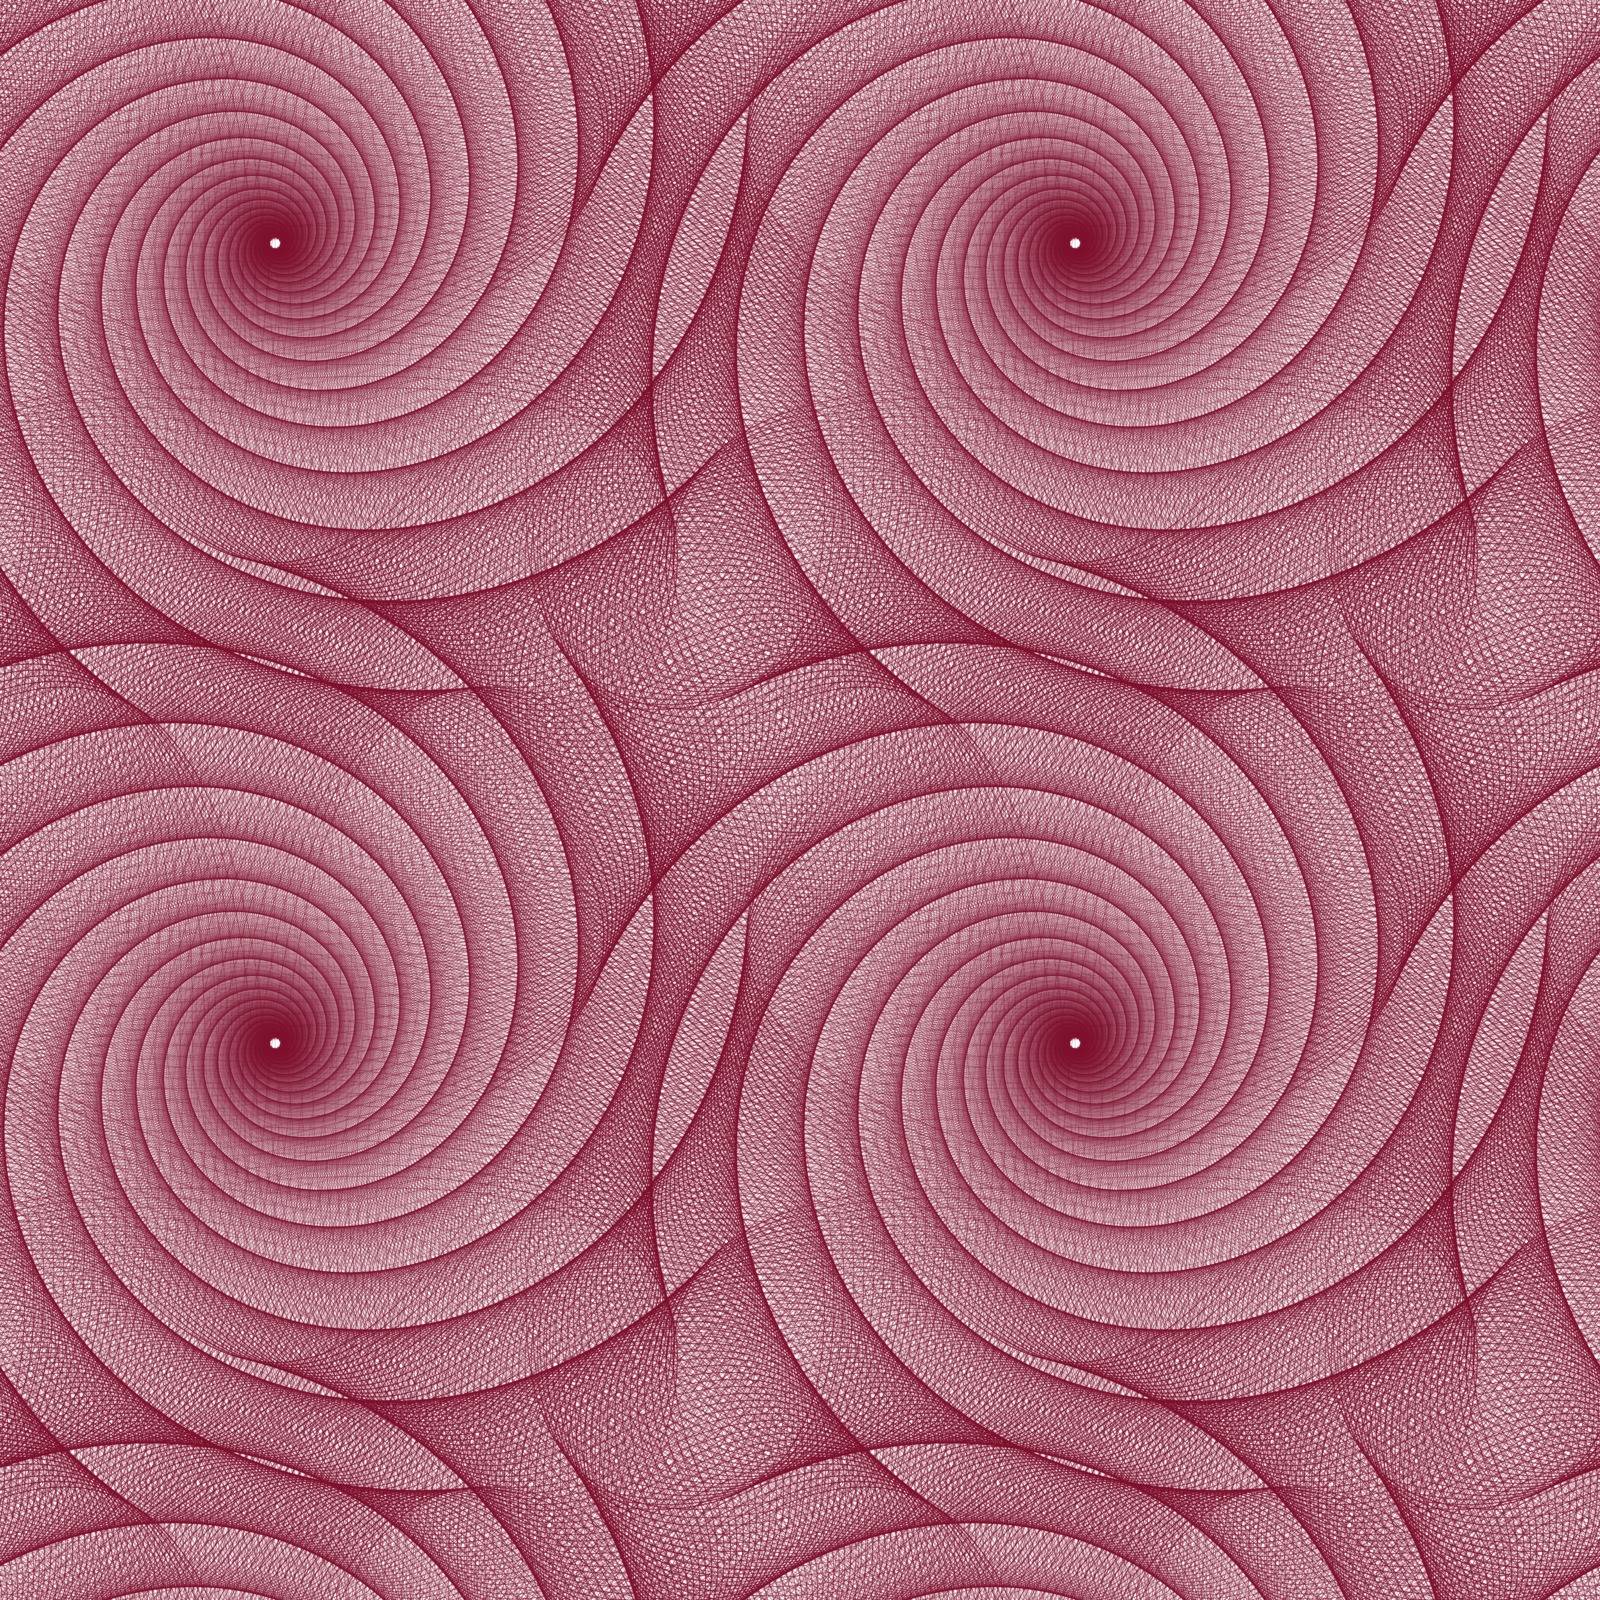 Maroon repeating fractal curved line pattern design